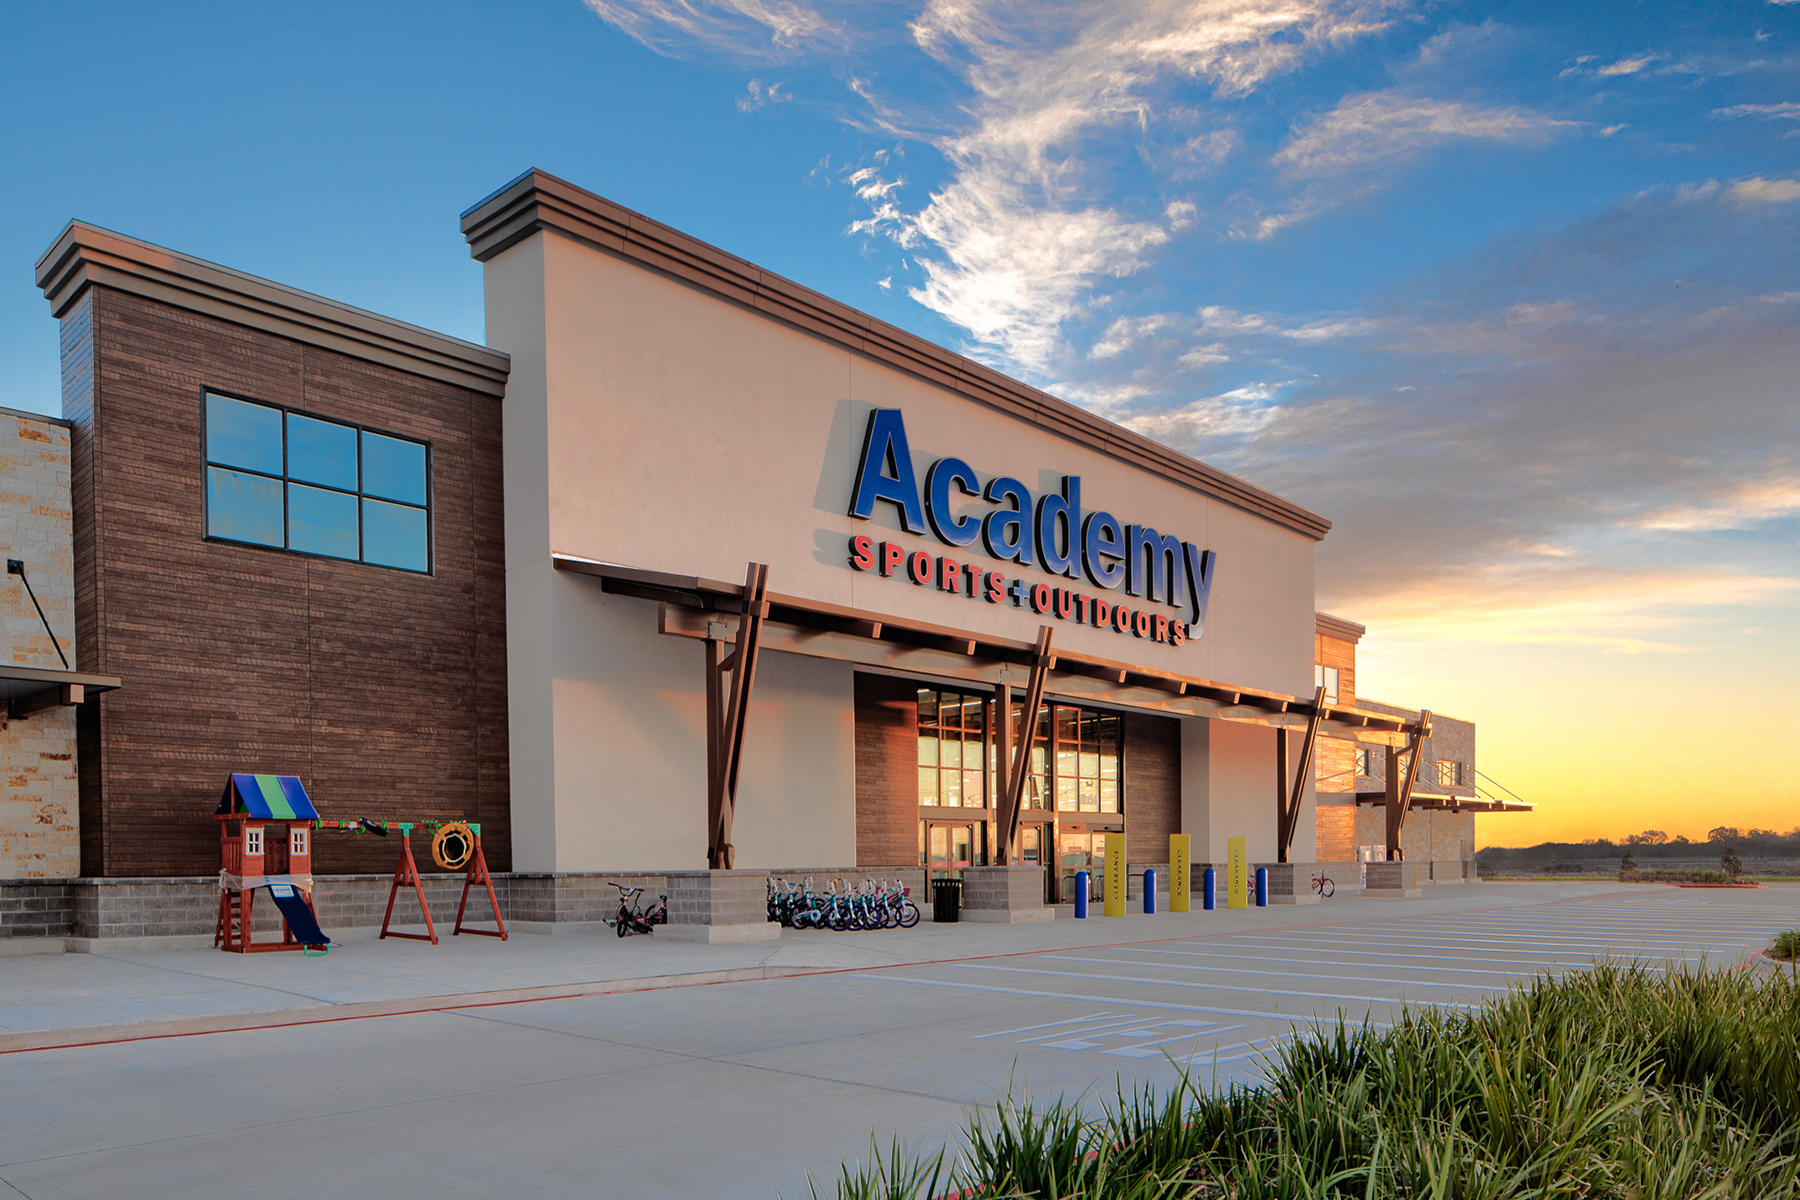 Academy Sports + Outdoors Store 321 ArchCon Corporation